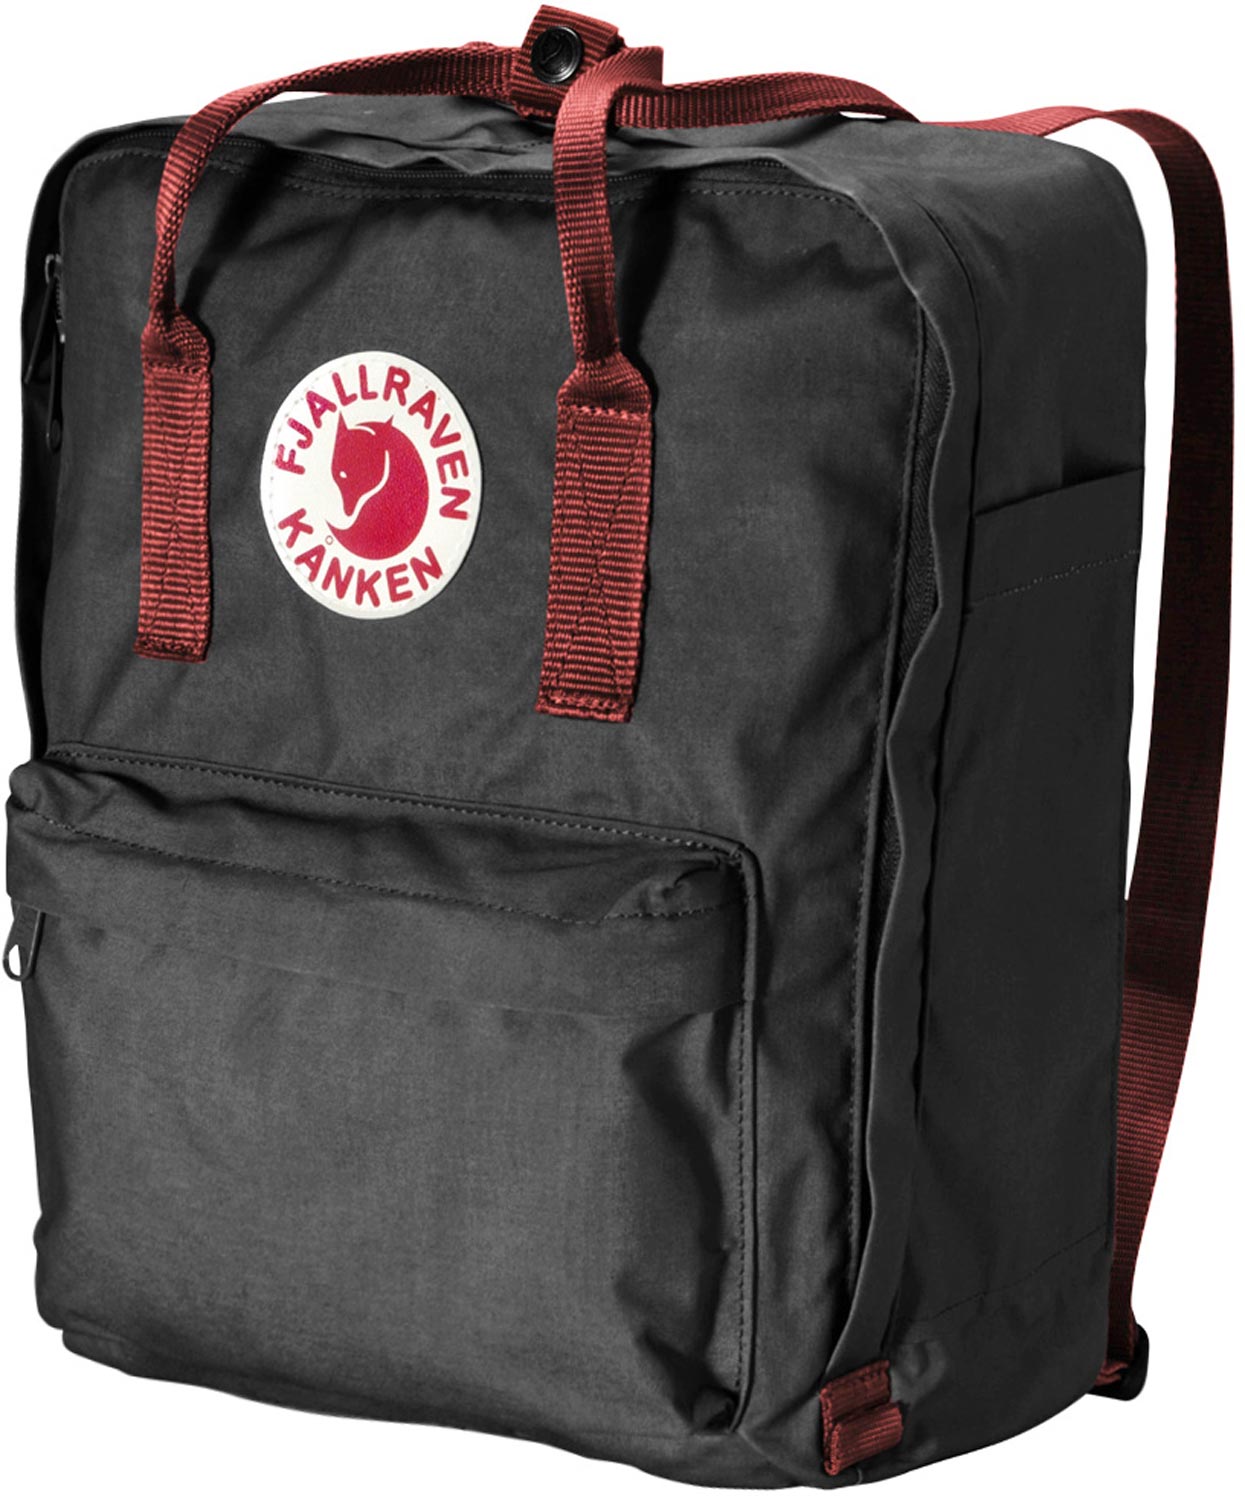 Fjallraven Kanken Classic Backpack Review And Guide